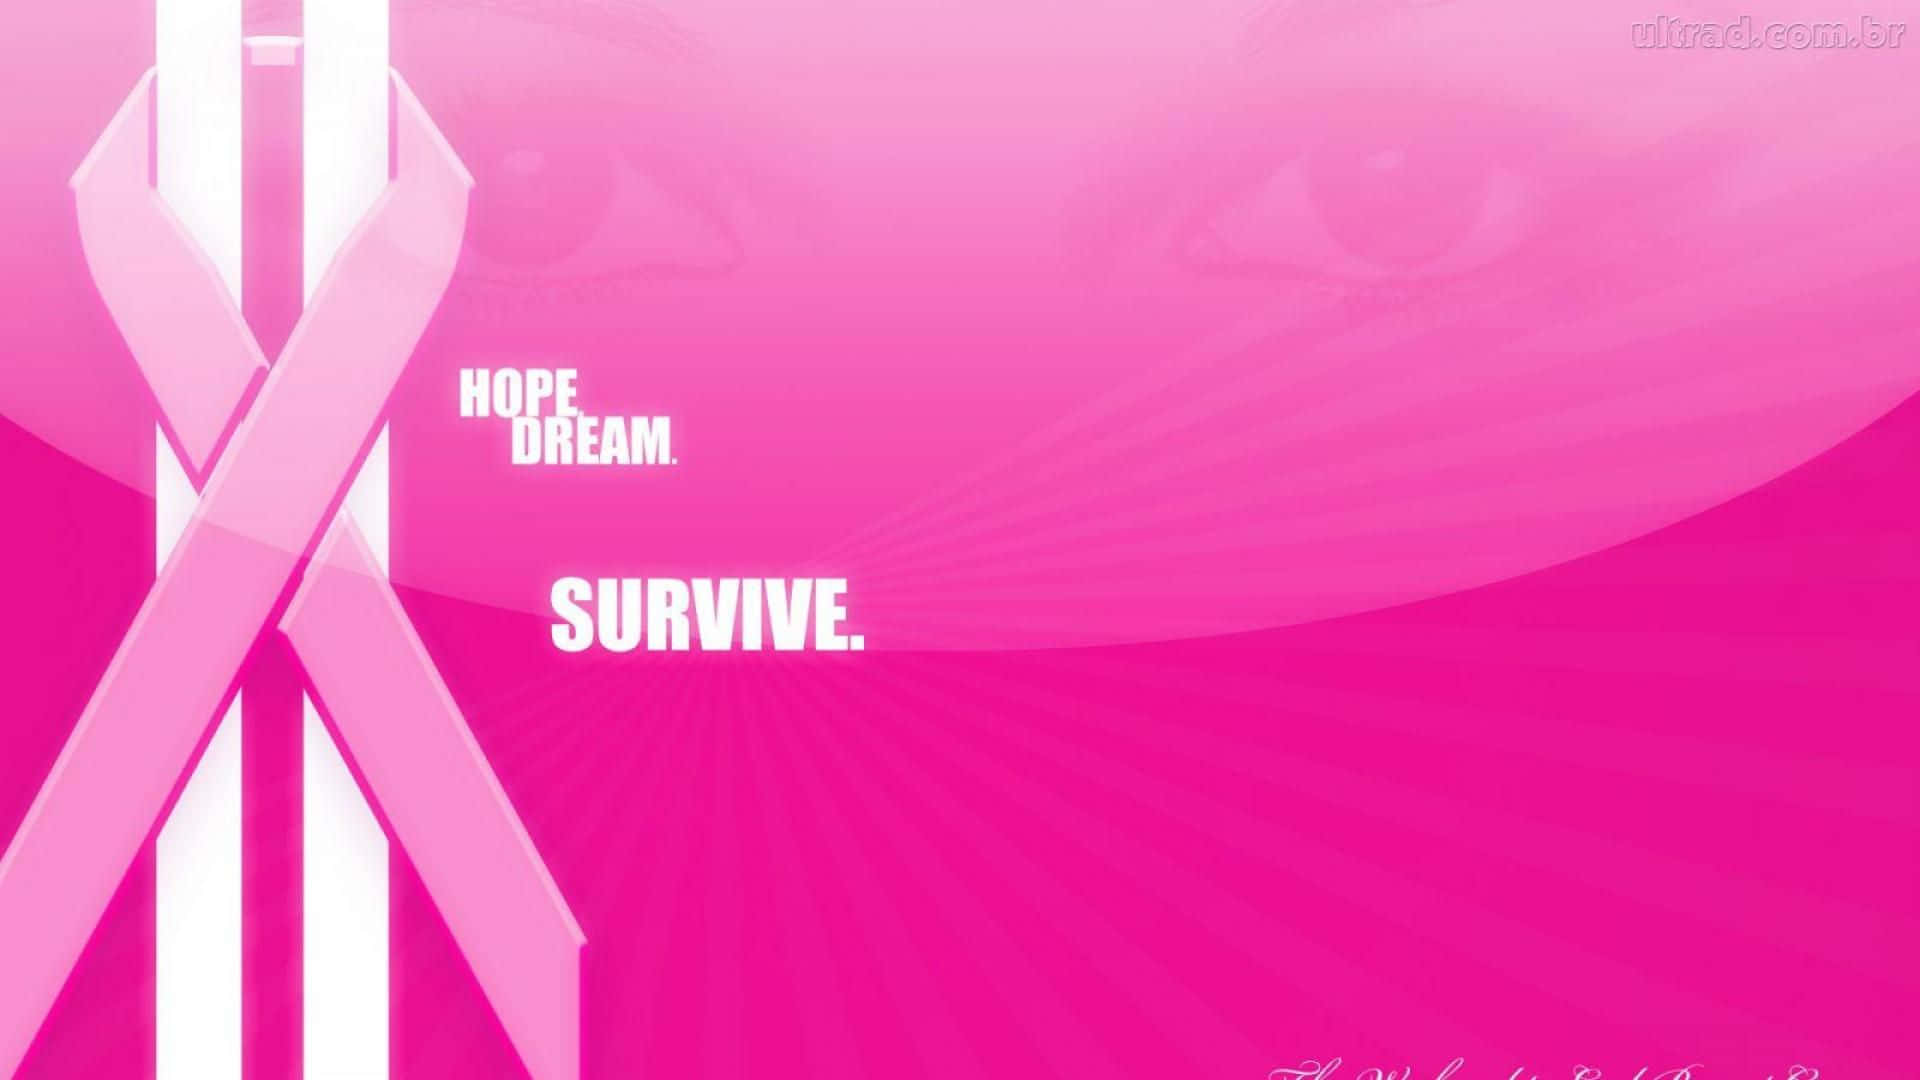 Support Breast Cancer Awareness With Pink Ribbon Wallpaper Wallpaper